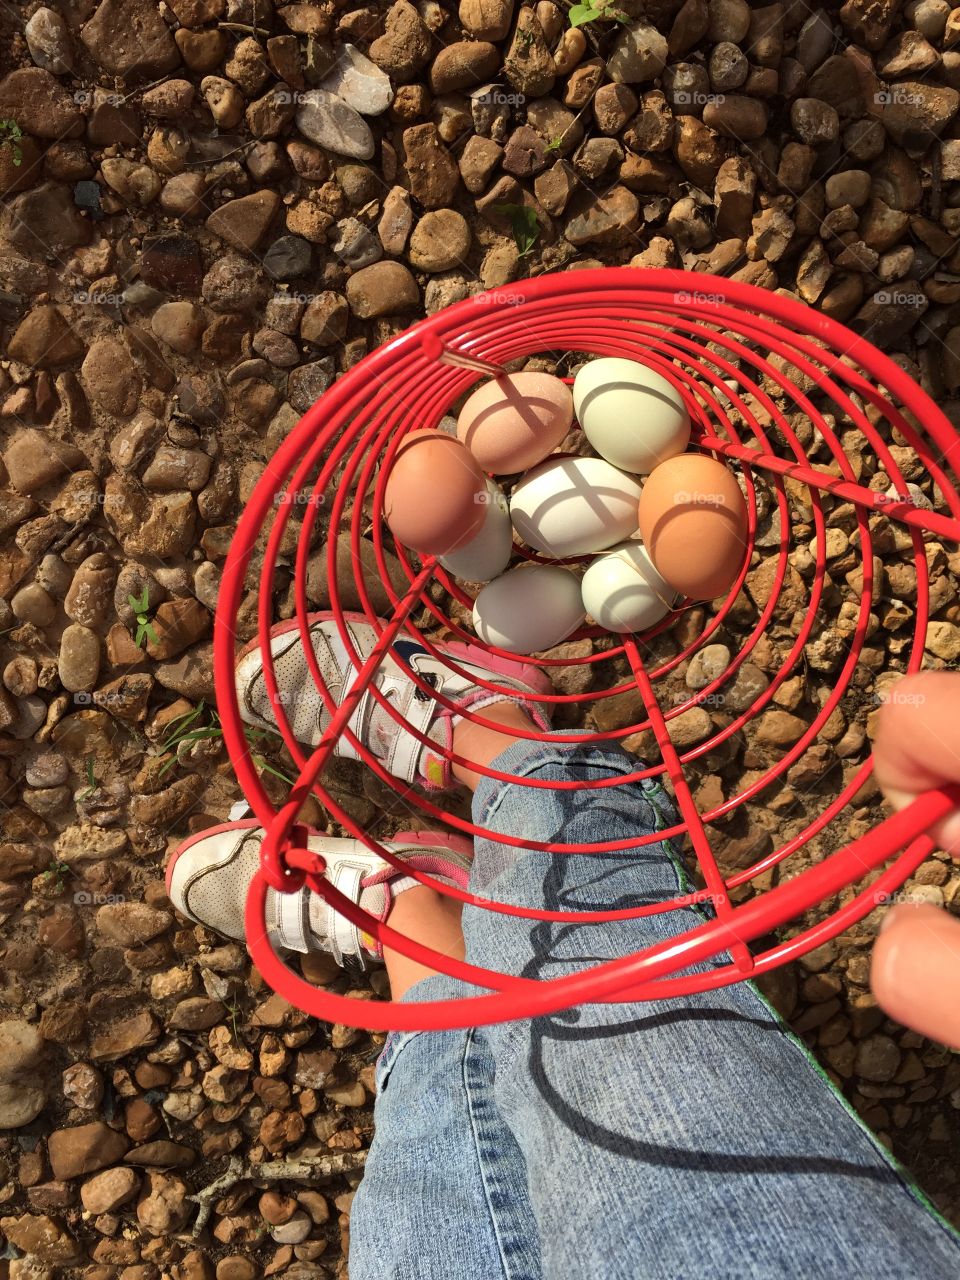 Eggs in a Red Basket